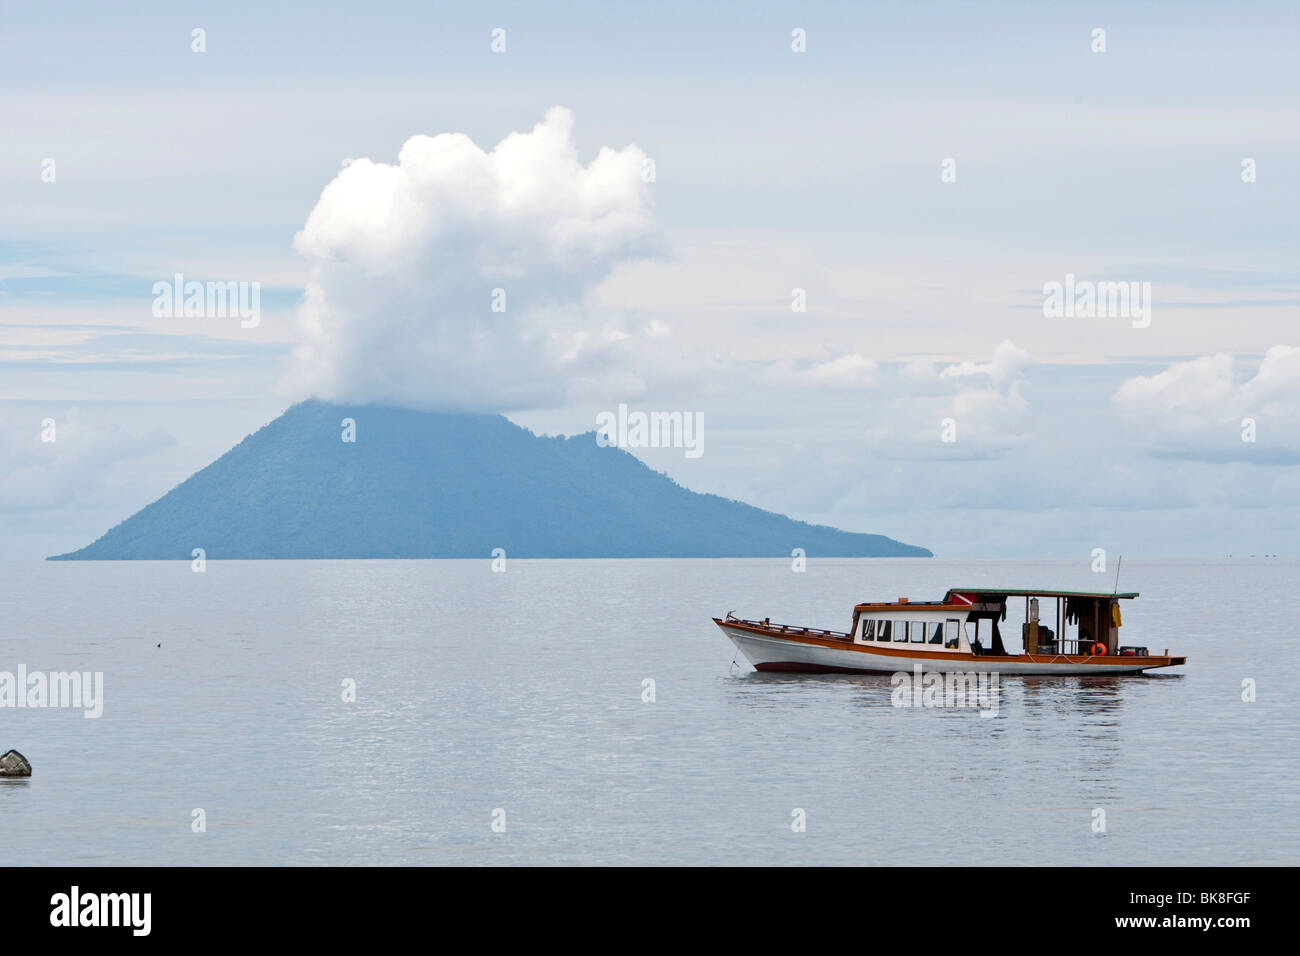 Diving boat in the Bunaken Marine Park in front of Mt Manado Tua, North Sulawesi, Indonesia Stock Photo